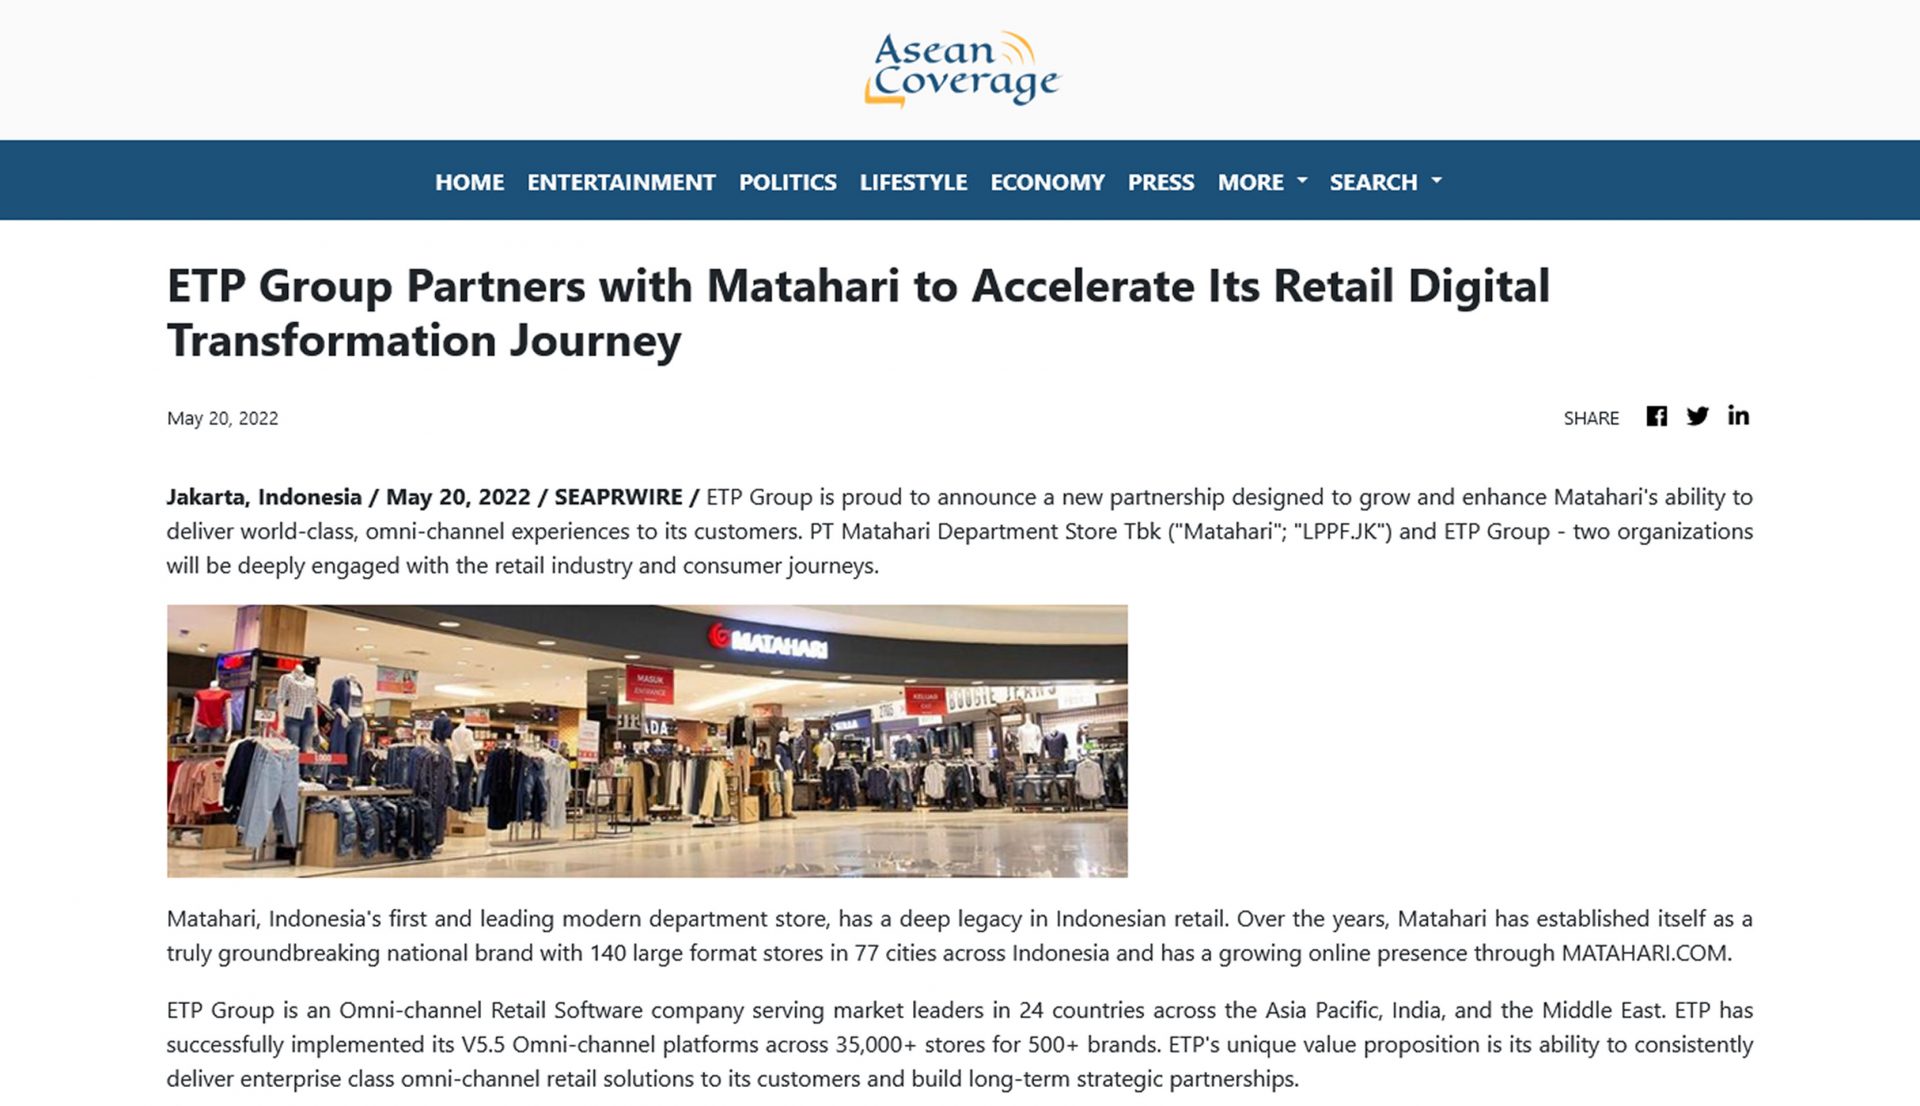 Asean Coverage: ETP Group Partners with Matahari to Accelerate Its Retail Digital Transformation Journey